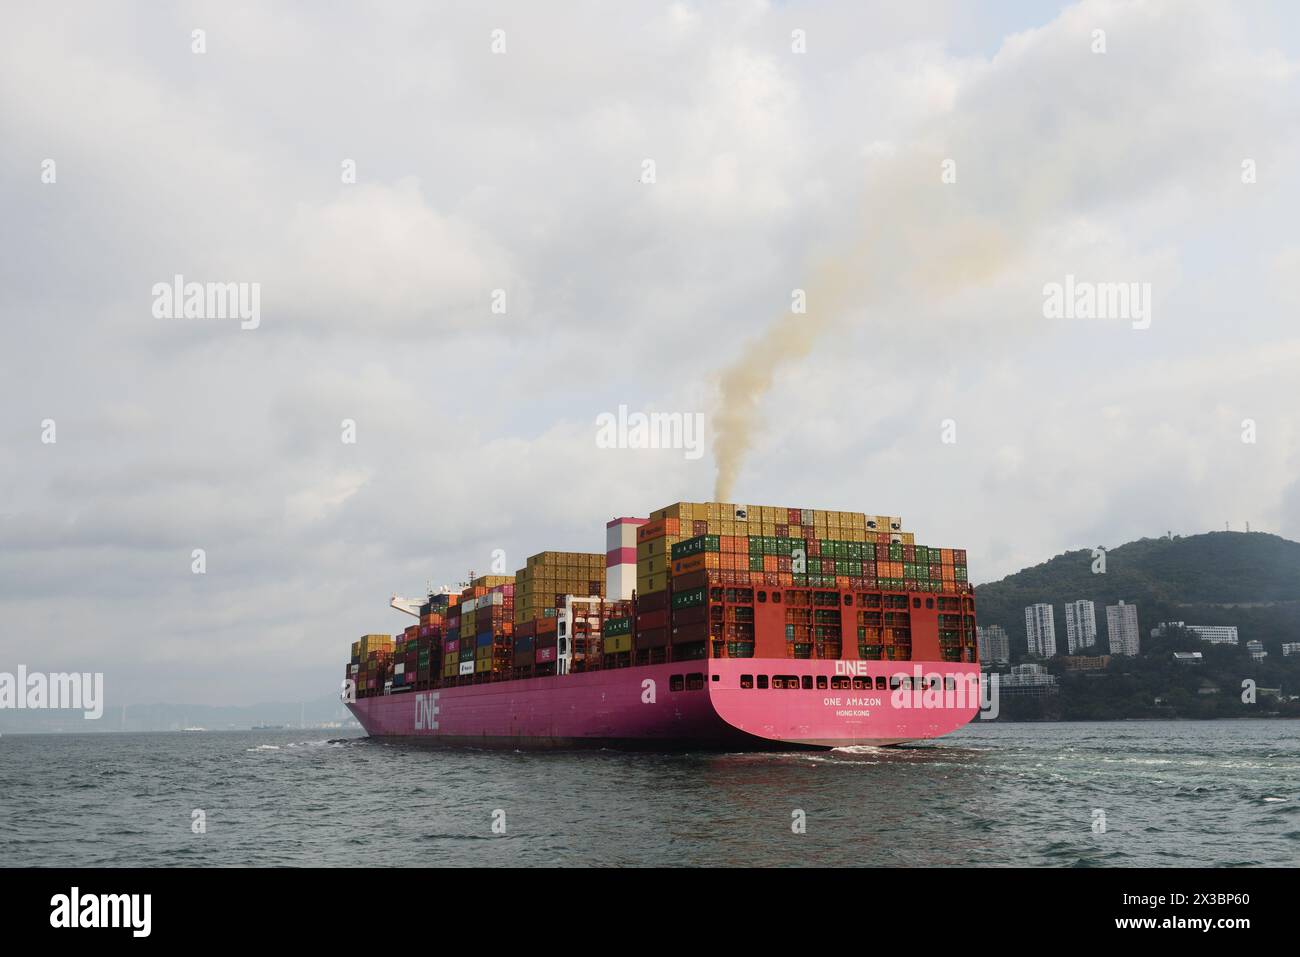 The One Amazon container ship heading to the port of Hong Kong. Stock Photo